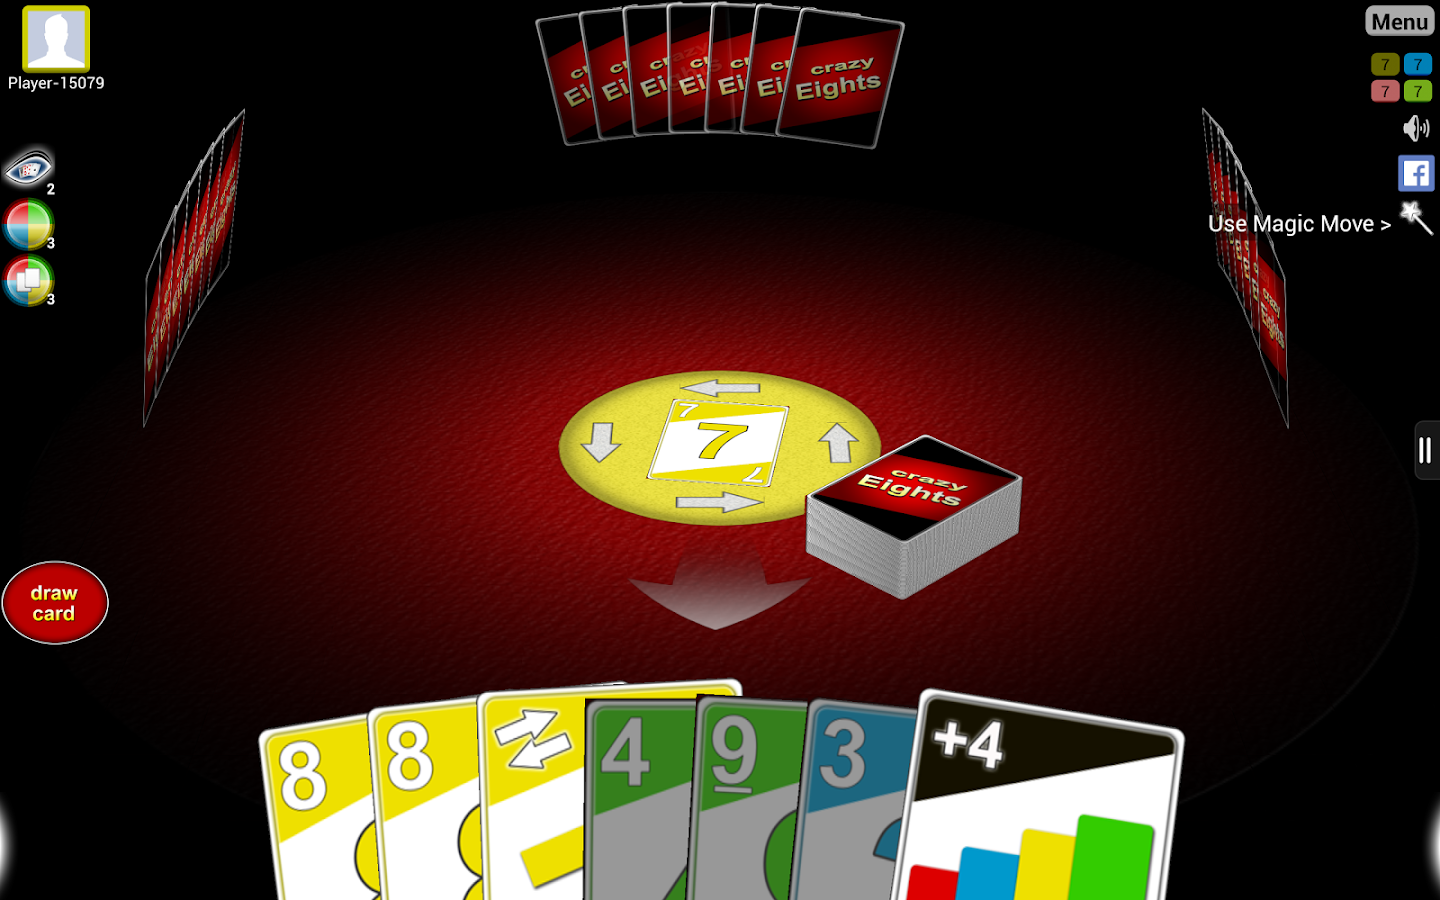 What are the rules for the card game Crazy Eights?